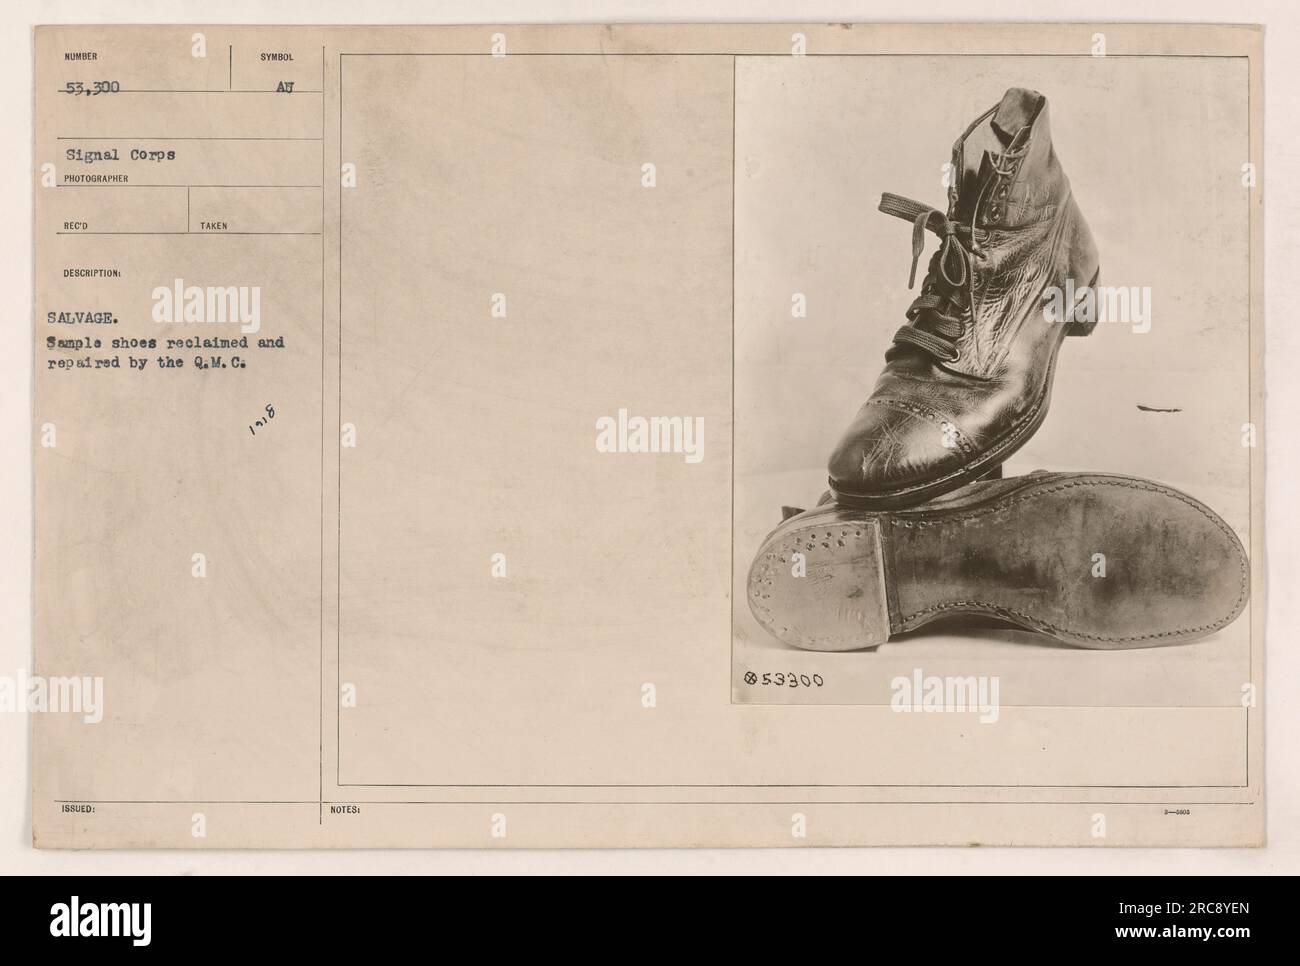 Sample shoes salvaged and repaired by the Quartermaster Corps (Q.M.C.) with the identification number 53,300. The photograph was taken in 1890 and is labeled as a symbol of salvage. The shoes were reclaimed by the Signal Corps photographer to document military activities during World War One. Stock Photo